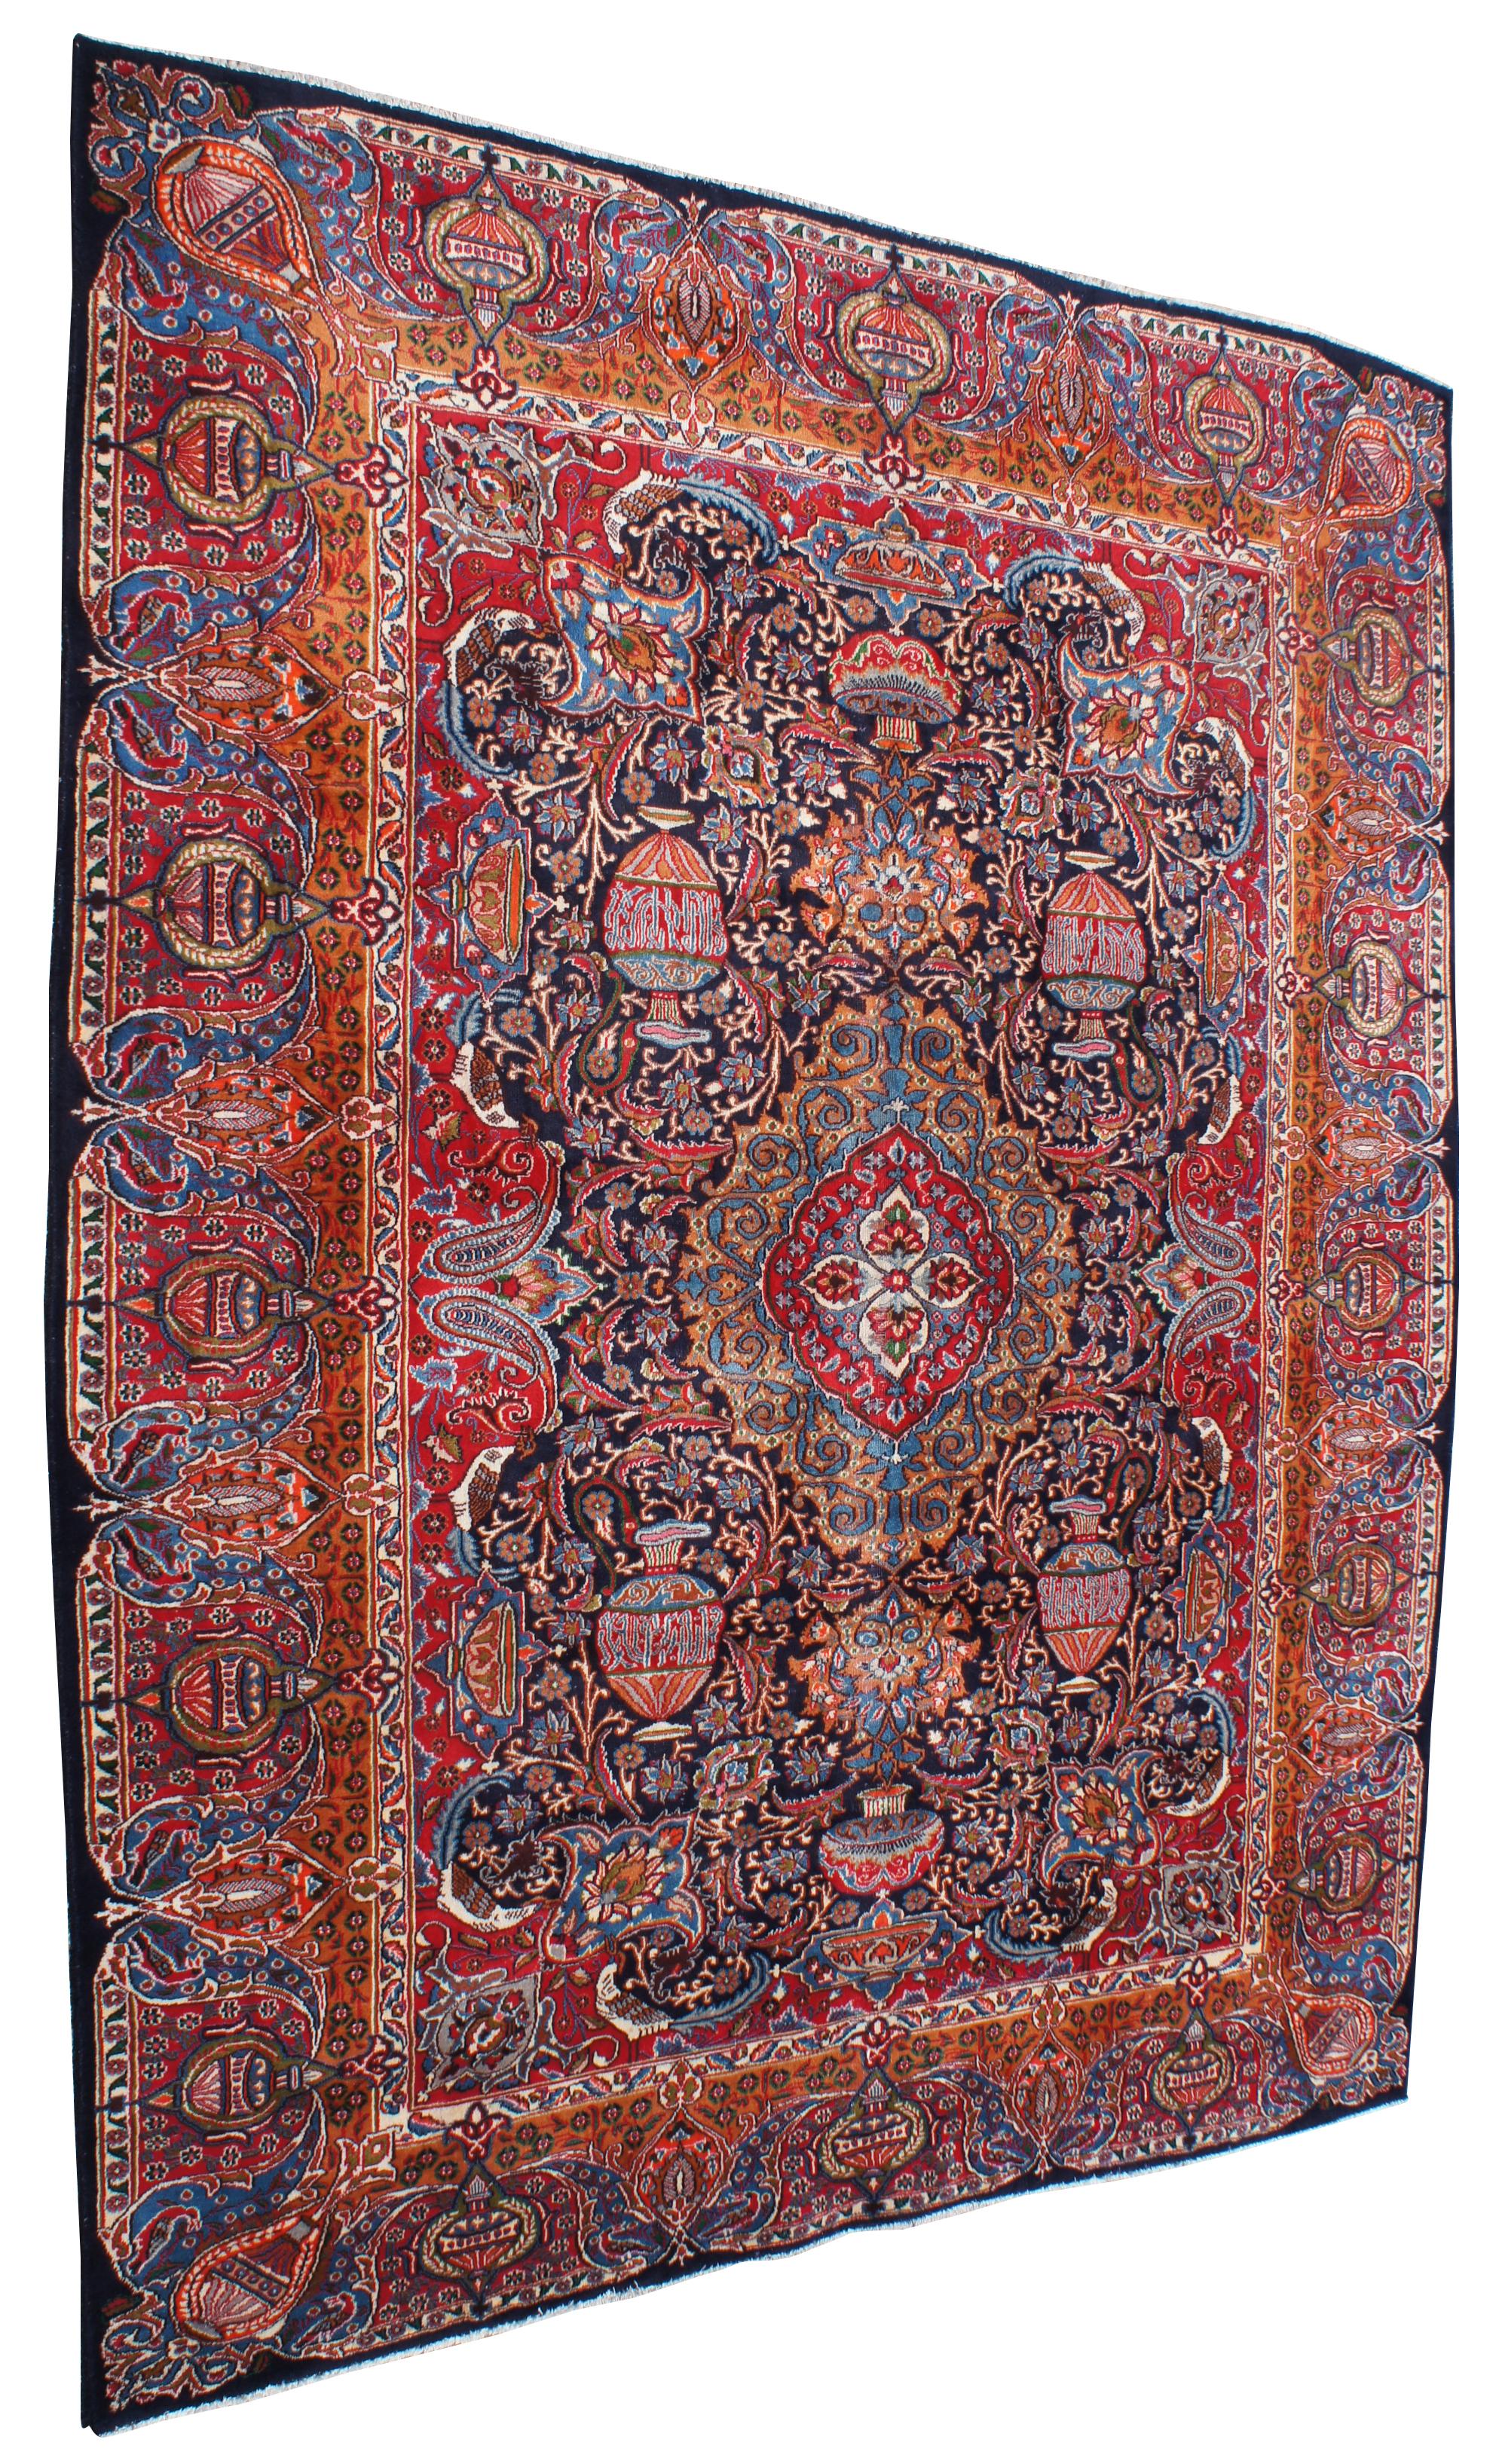 Antique hand knotted Persian rug featuring a field of reds and blues with ornaments, trophy urns or vases, various birds and floral accents. Shades of reds, blues, orange, cream or beige, greens and browns.
   